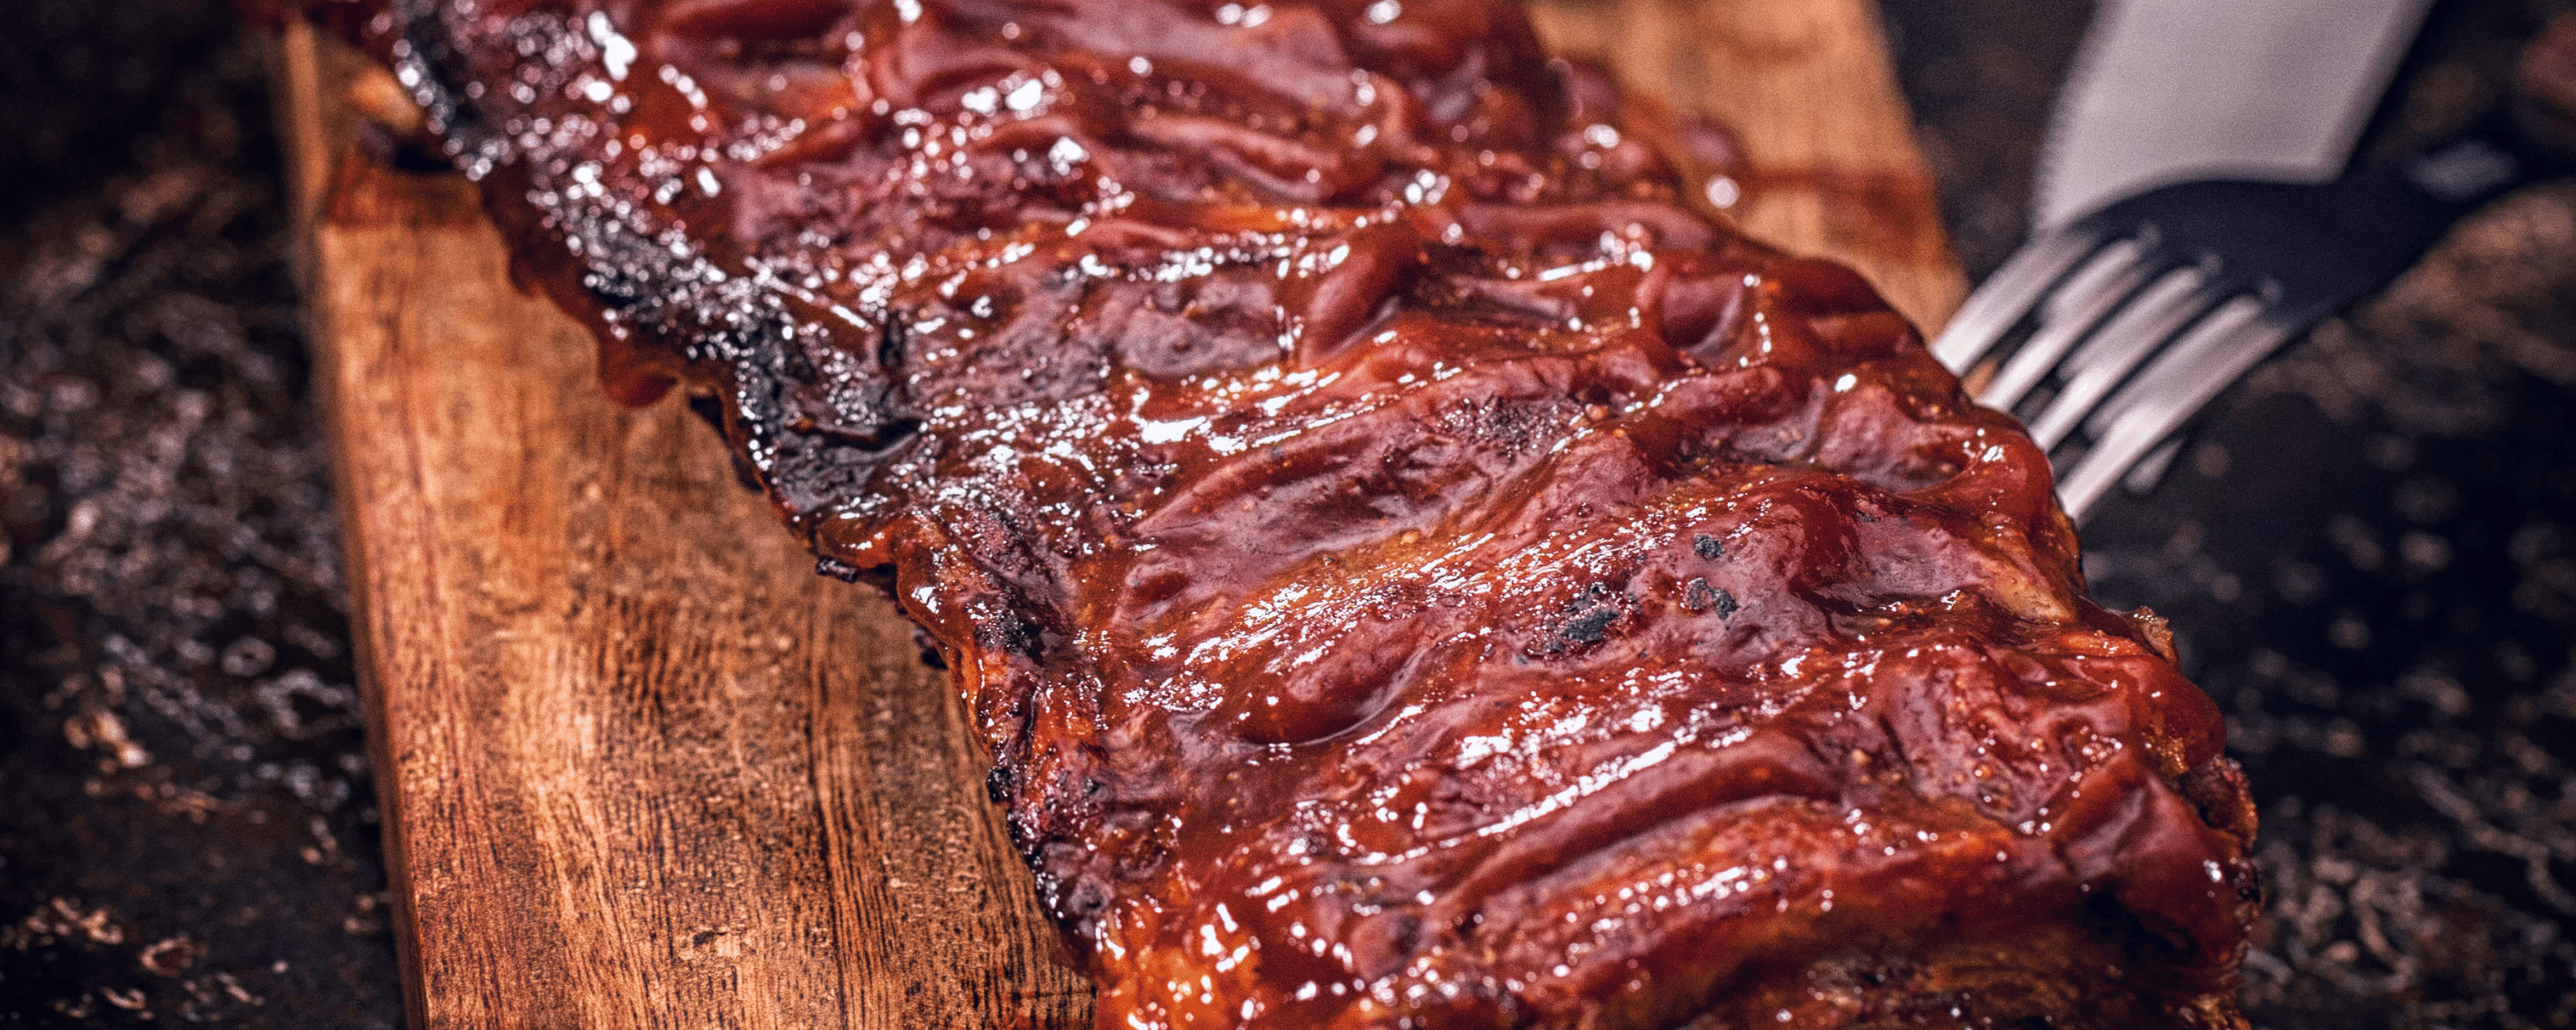 Plate of ribs on a plank of wood